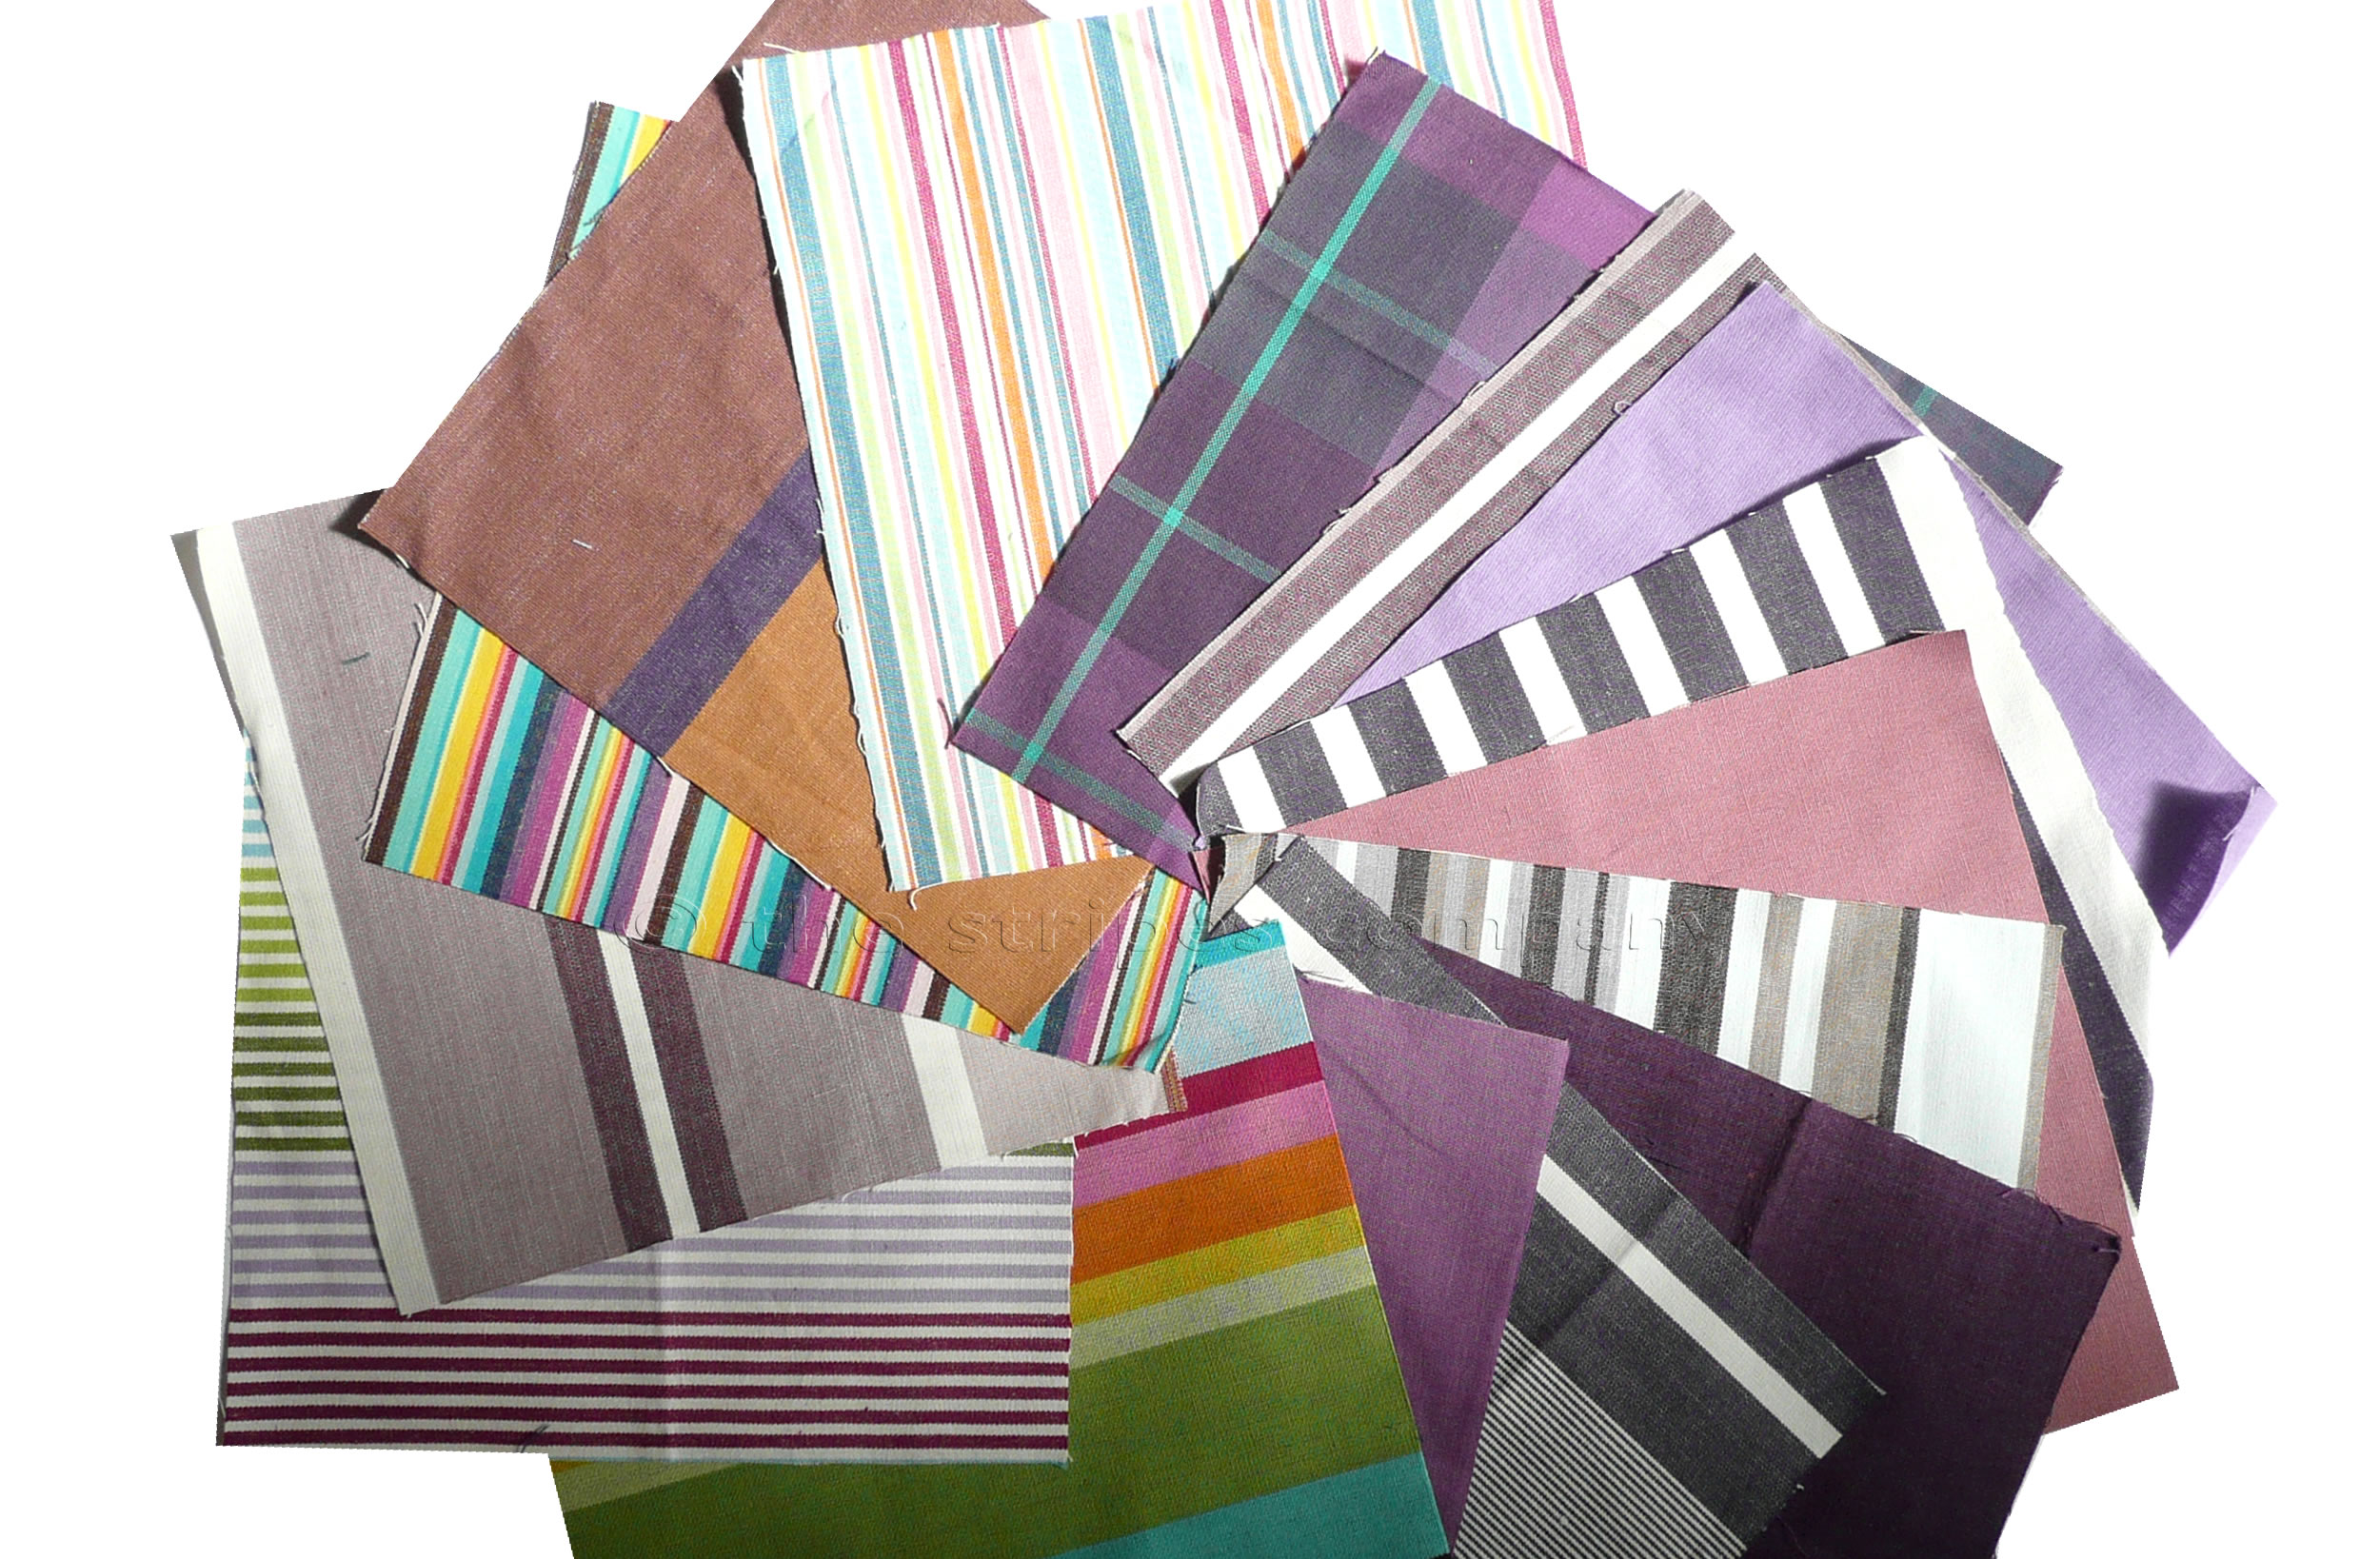 Bumper Pack of Striped Cotton Fabric Squares for Patchwork